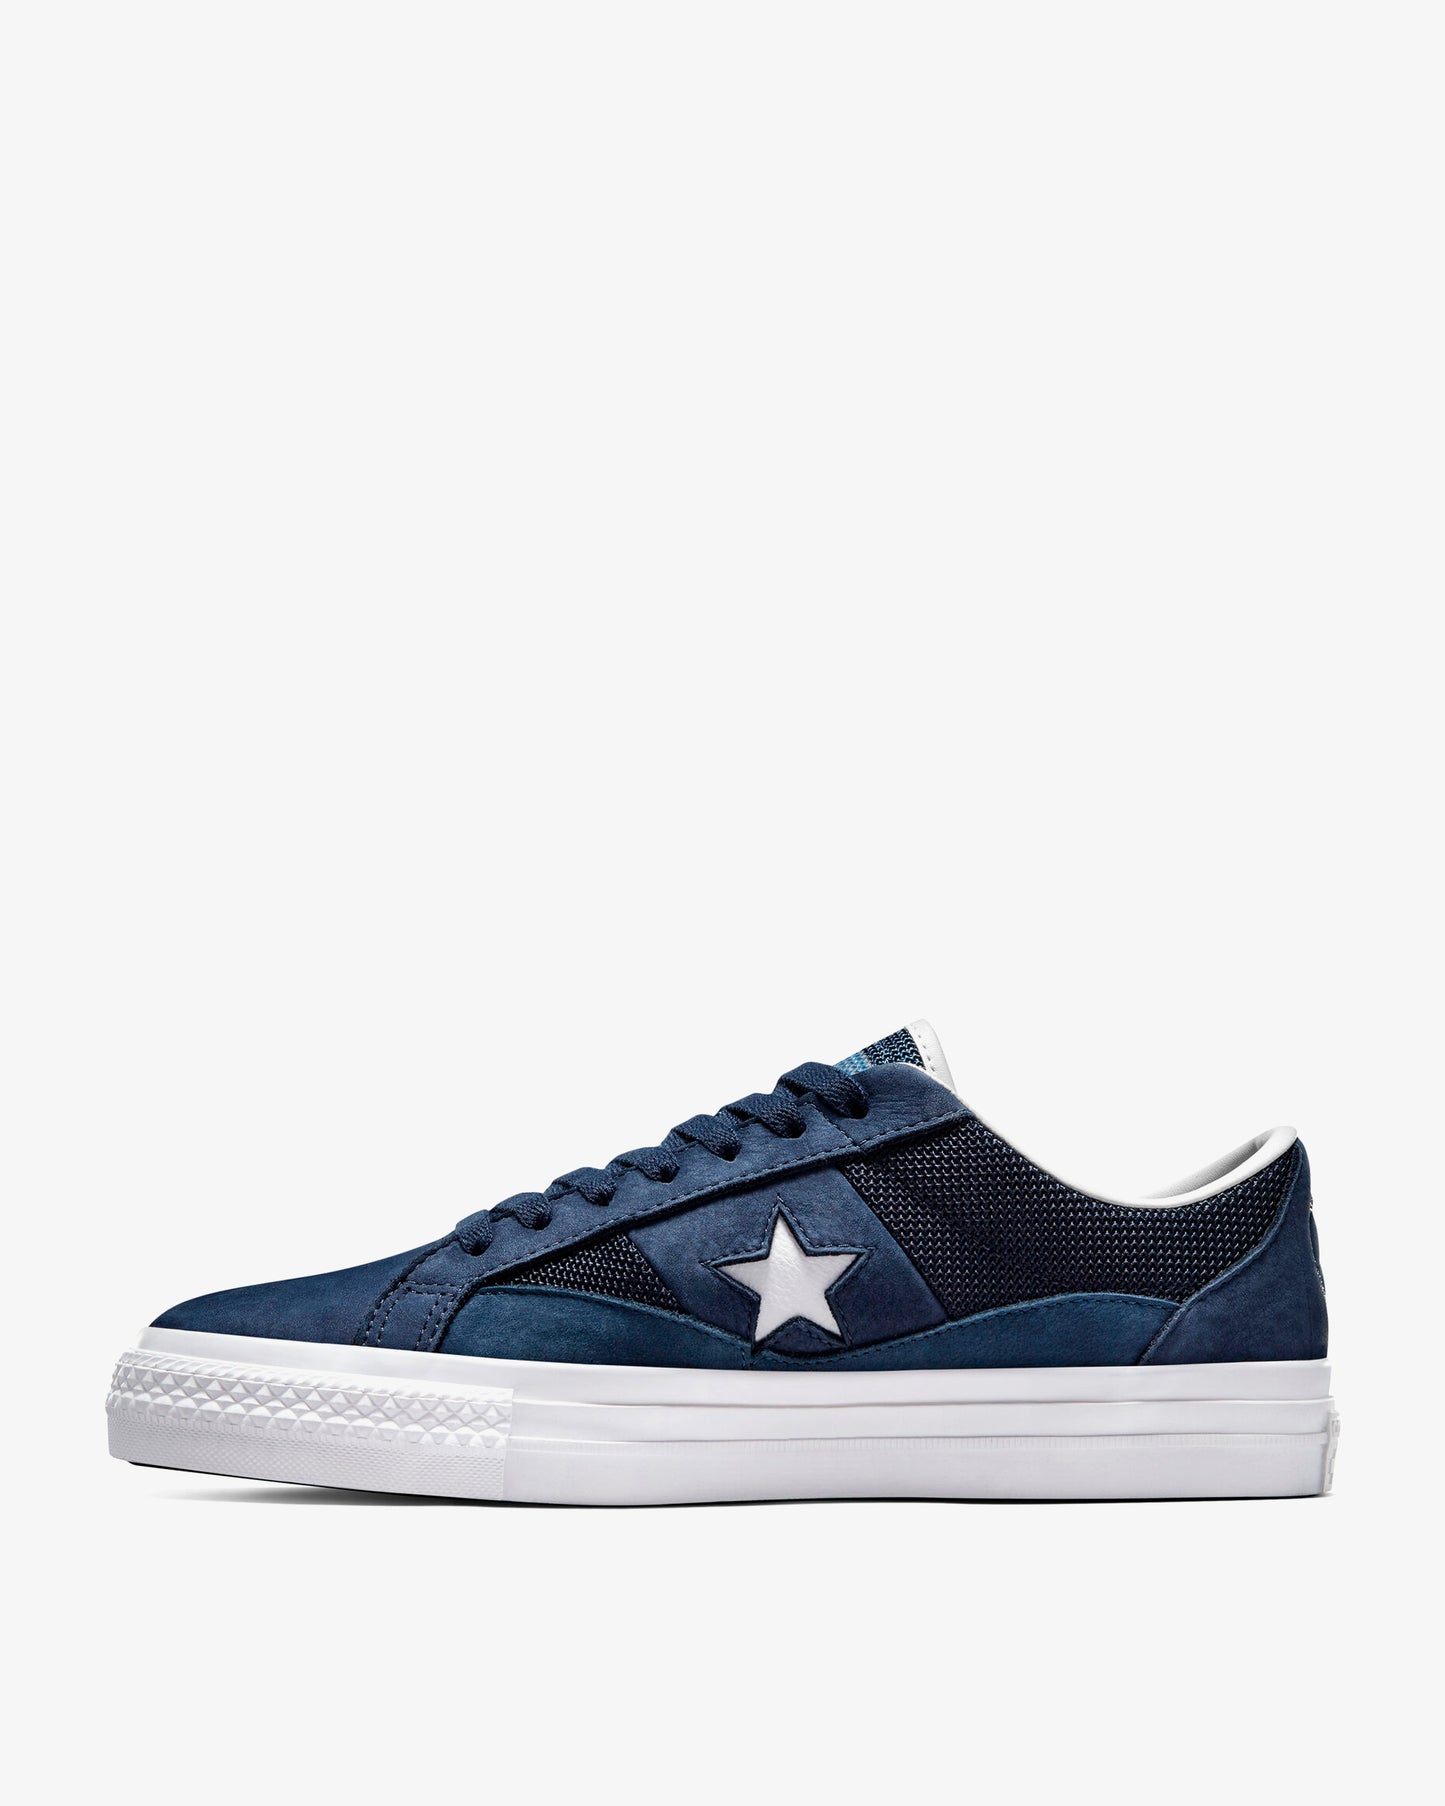 Converse One Star Pro Ox "Alltimers"